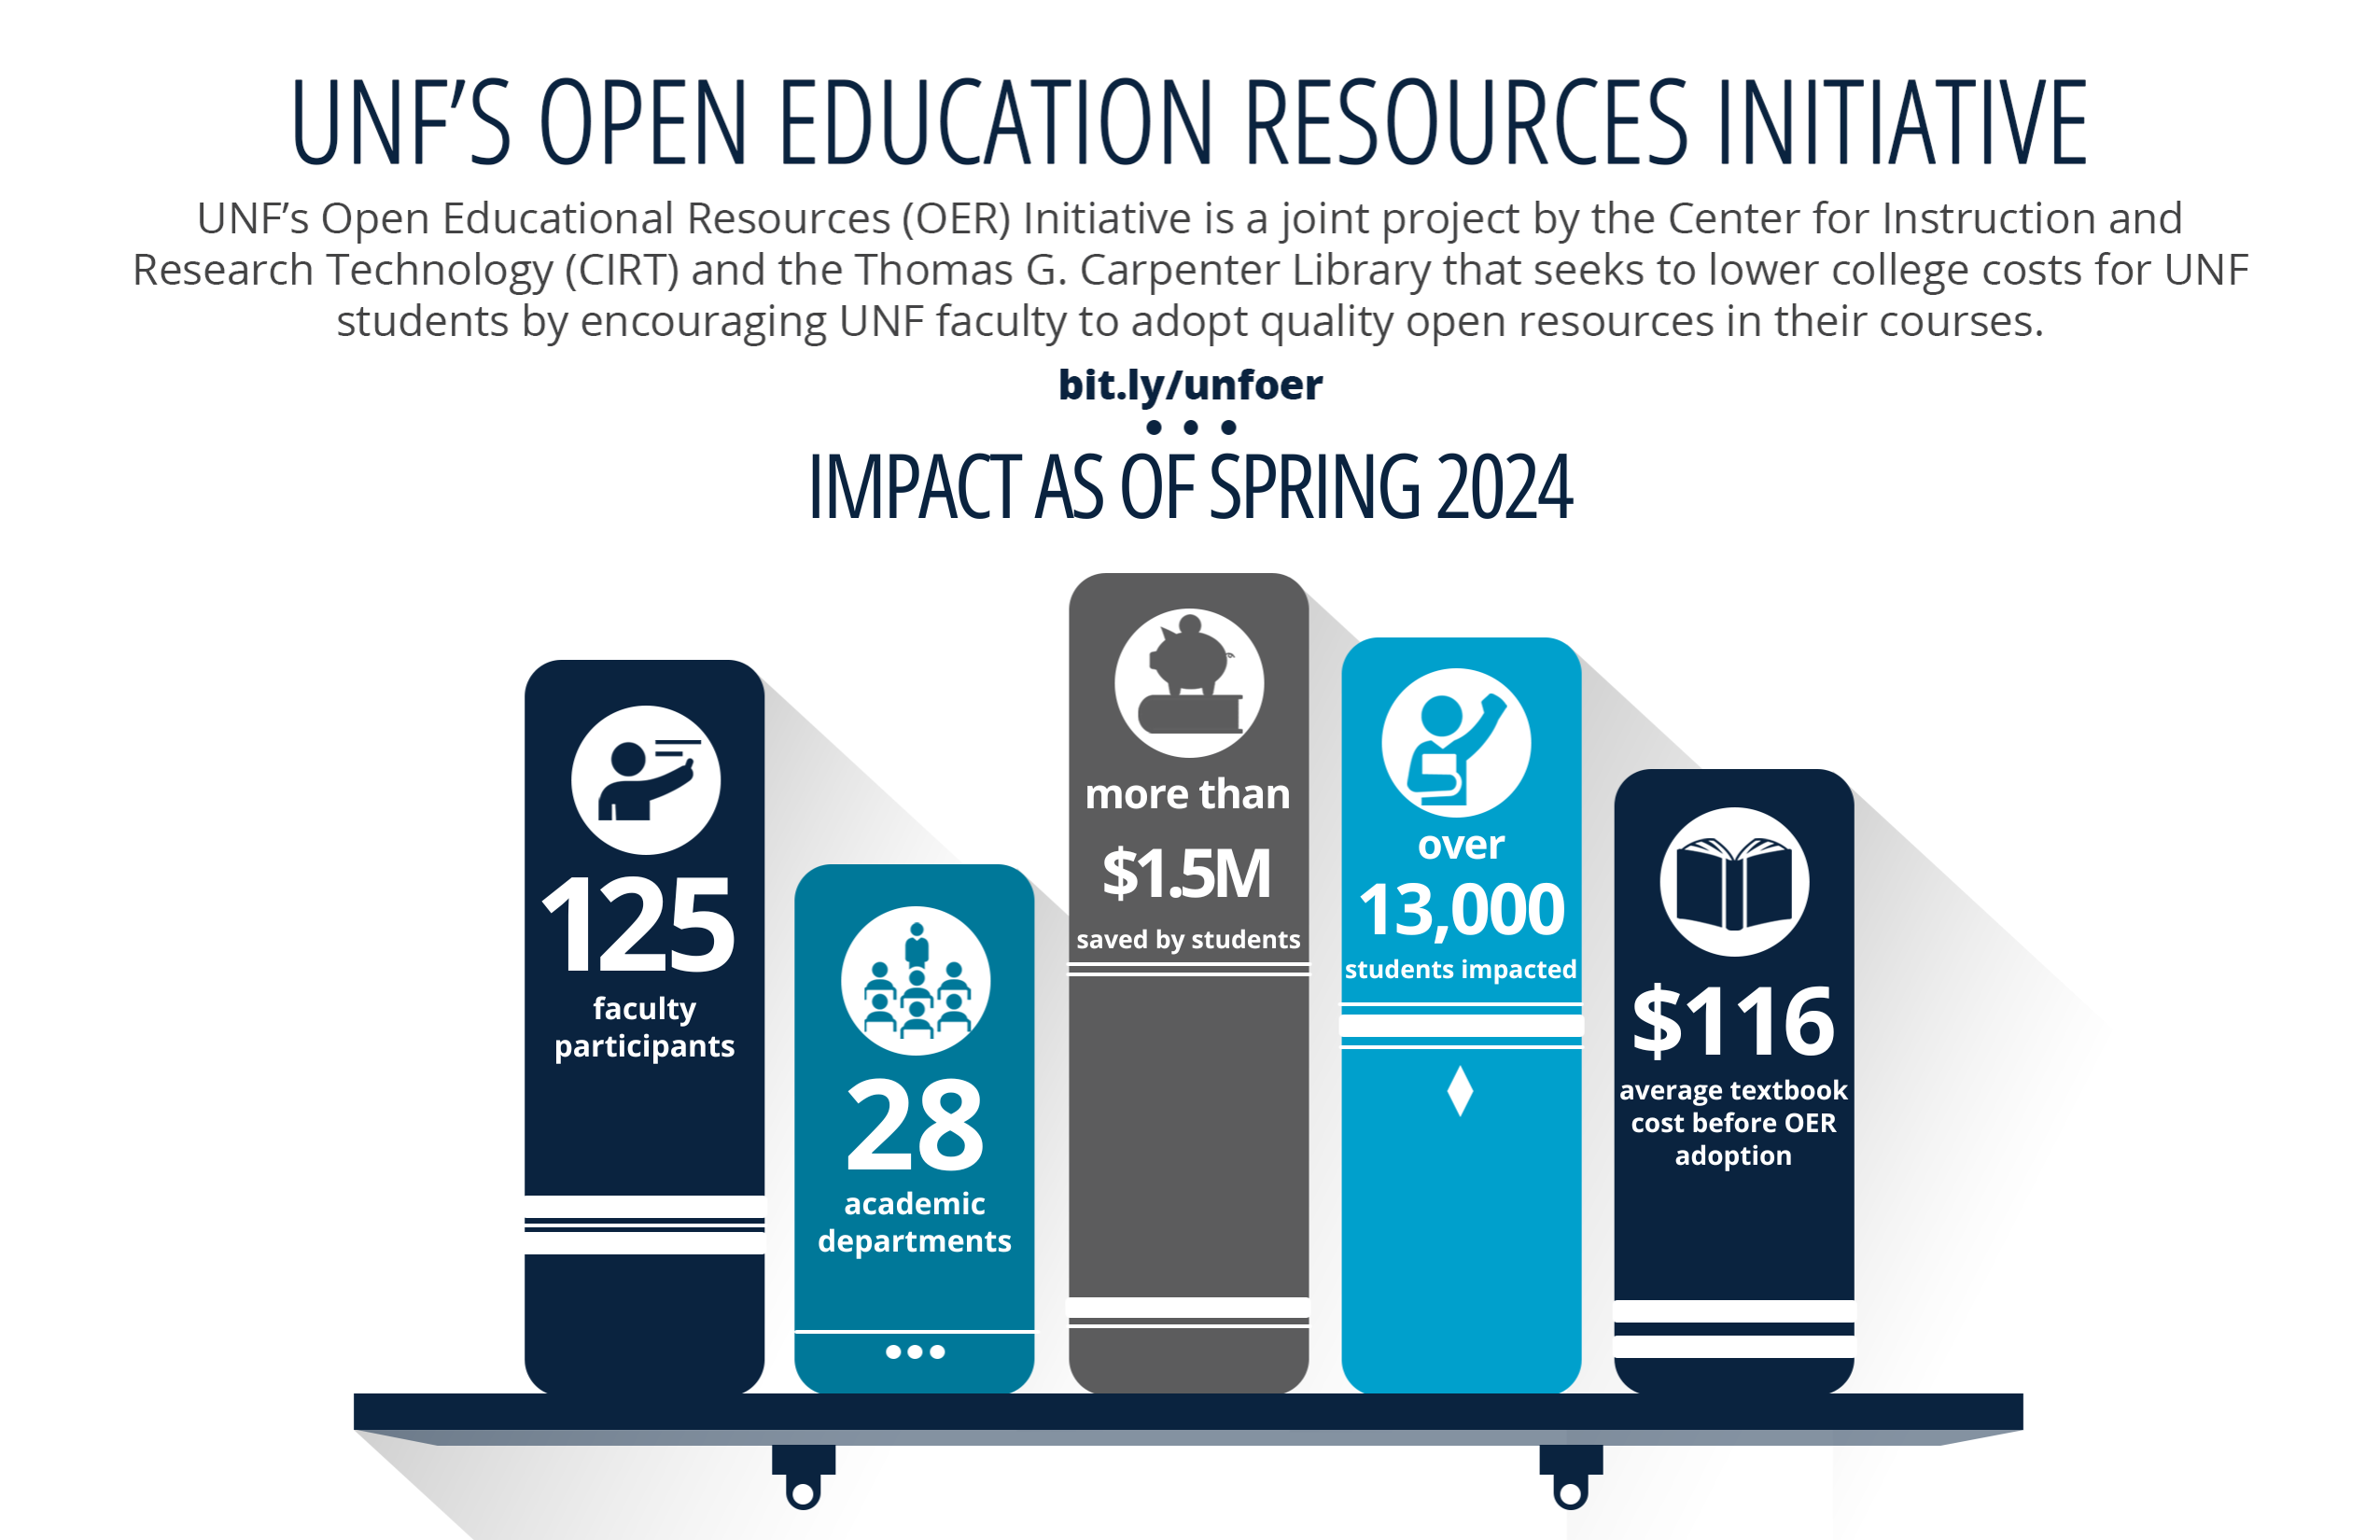 OER Impact Data Infographic text description in Resources section below